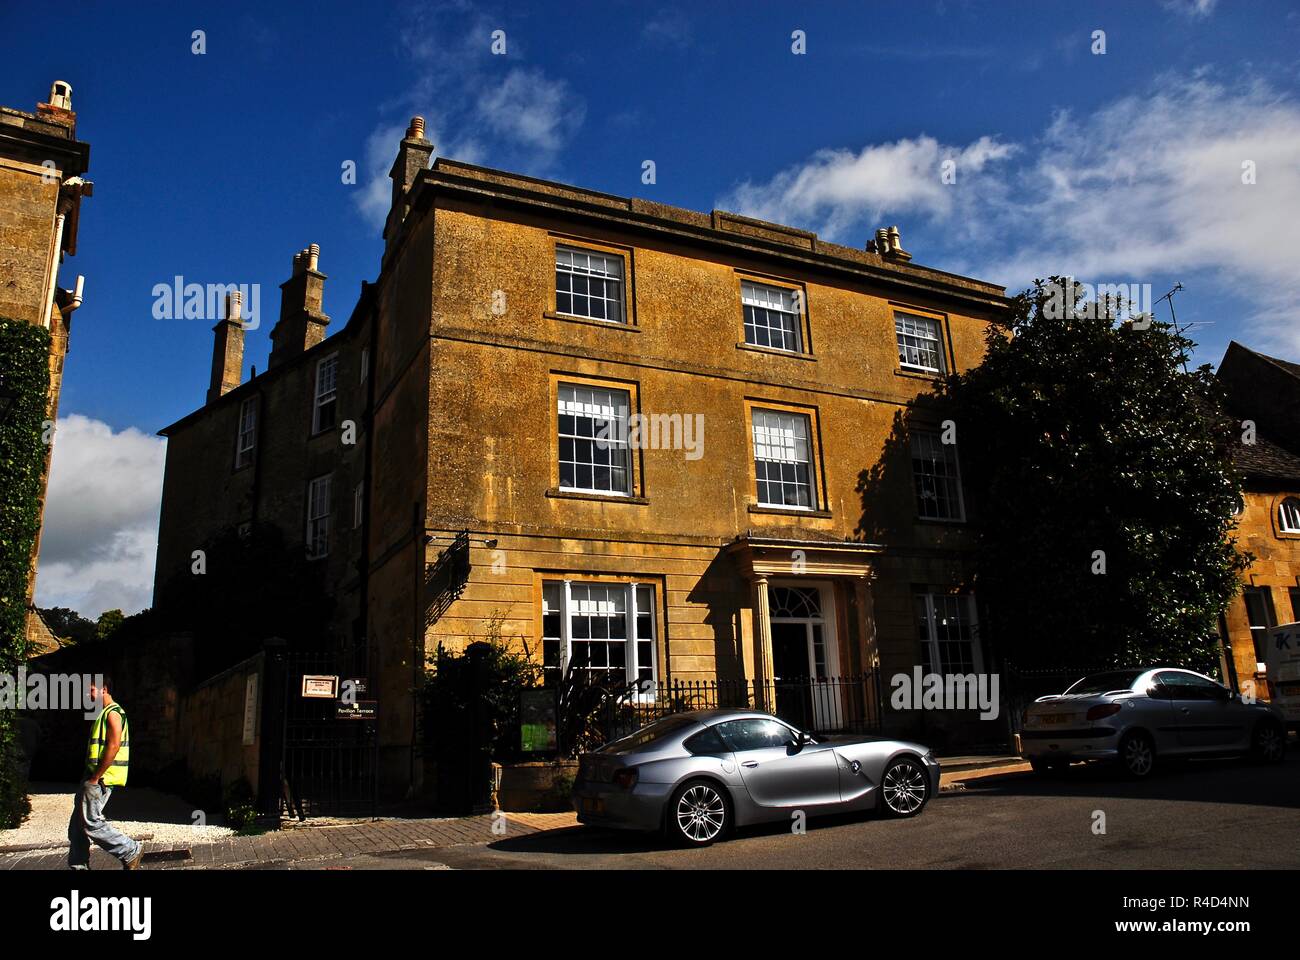 Cotswold stone buildings in the market town of Chipping Campden, Cotswolds, Gloucestershire, UK Stock Photo